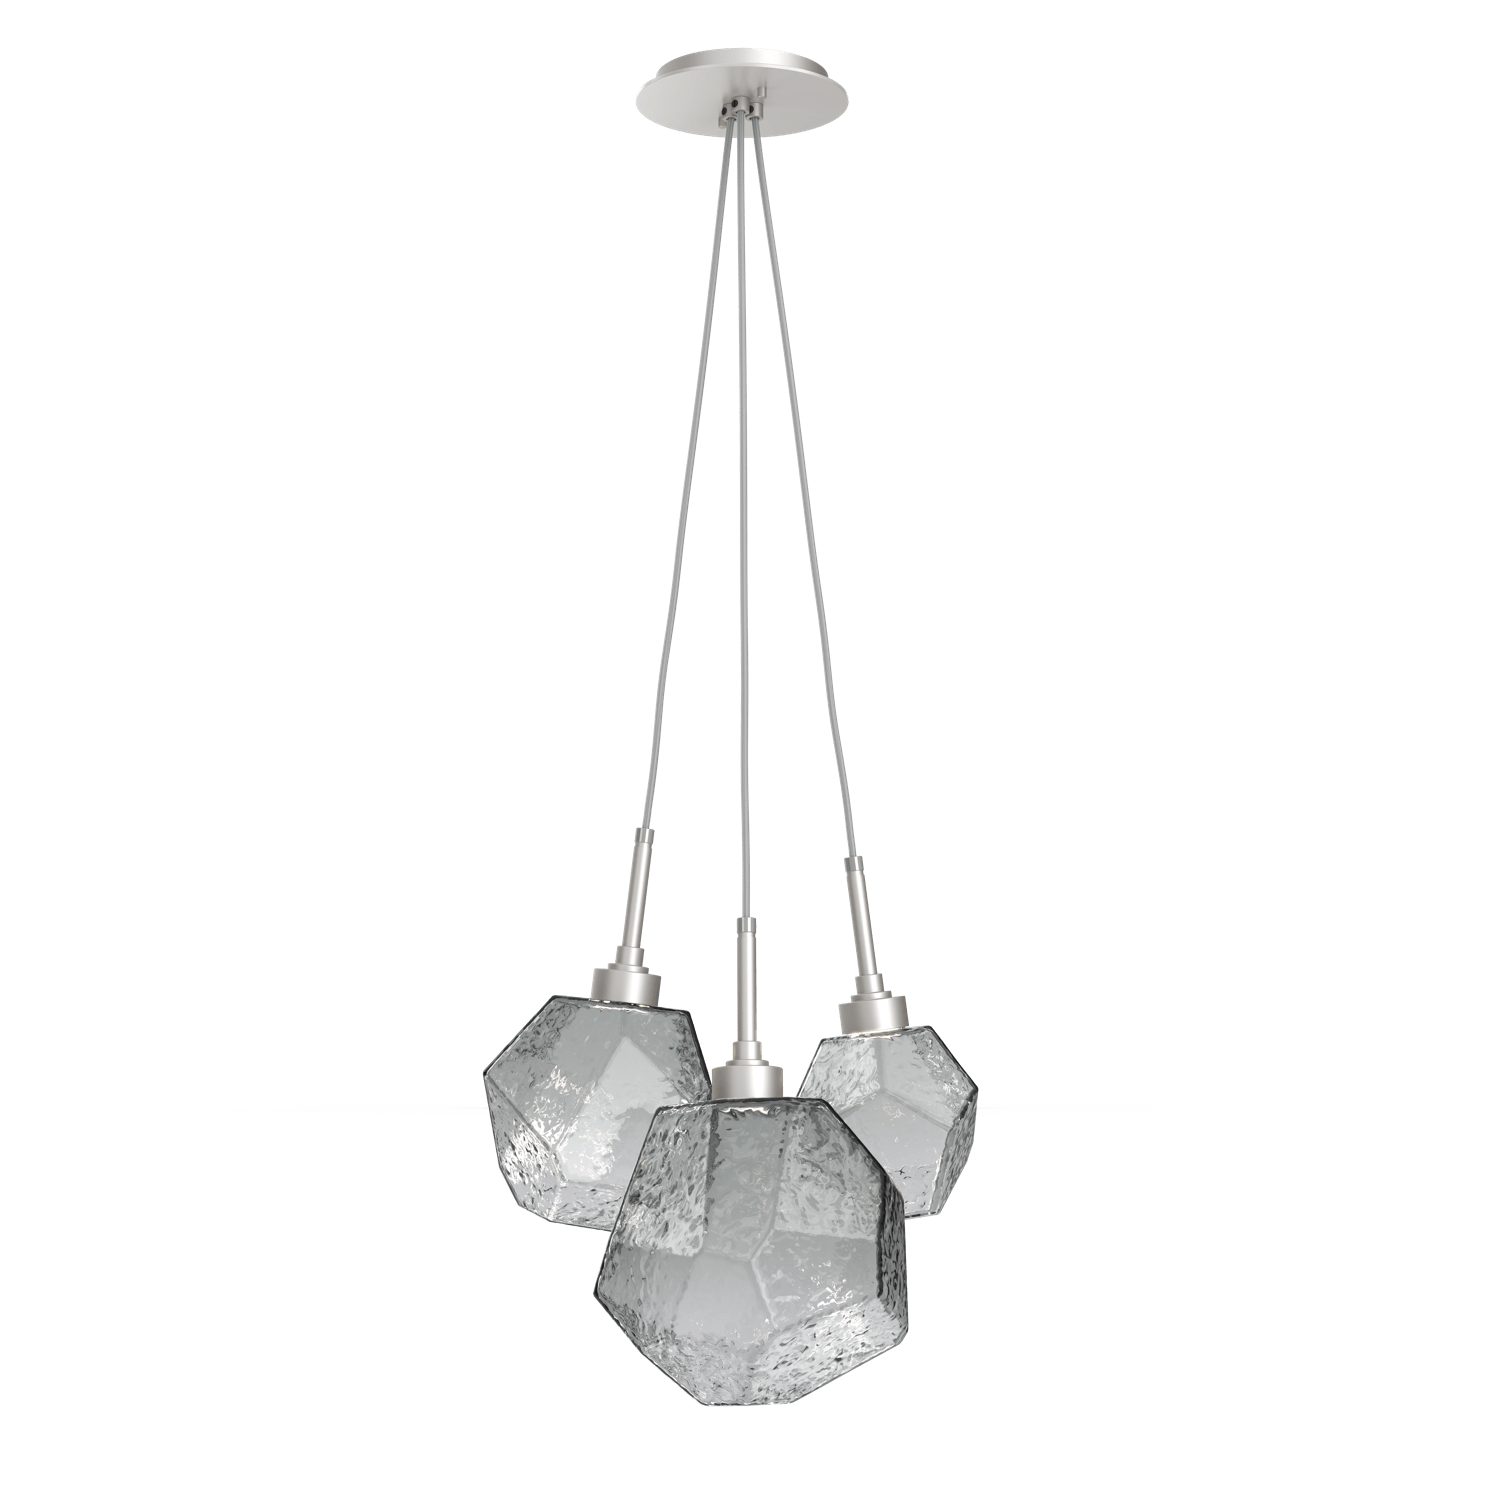 CHB0039-0E-BS-S-Hammerton-Studio-Gem-3-light-cluster-pendant-light-with-metallic-beige-silver-finish-and-smoke-blown-glass-shades-and-LED-lamping